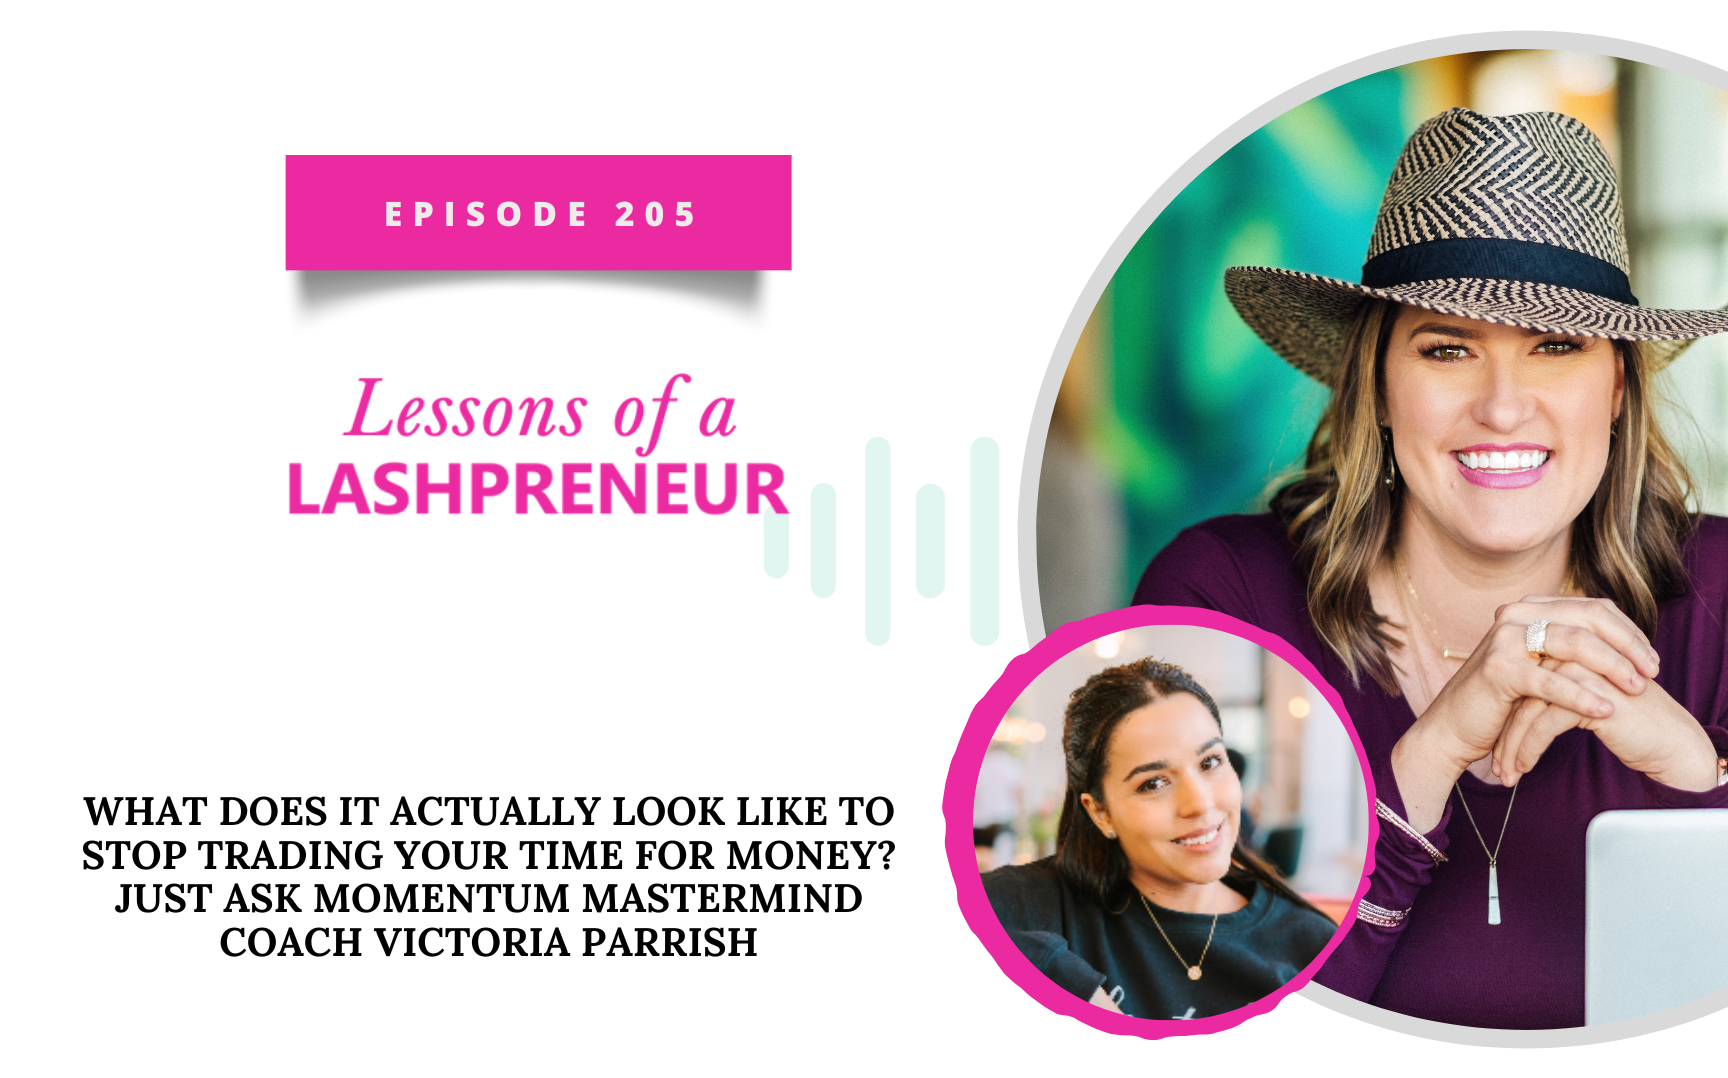 What Does It Actually Look Like To Stop Trading YOUR Time for Money? Just Ask Momentum Mastermind Coach Victoria Parrish